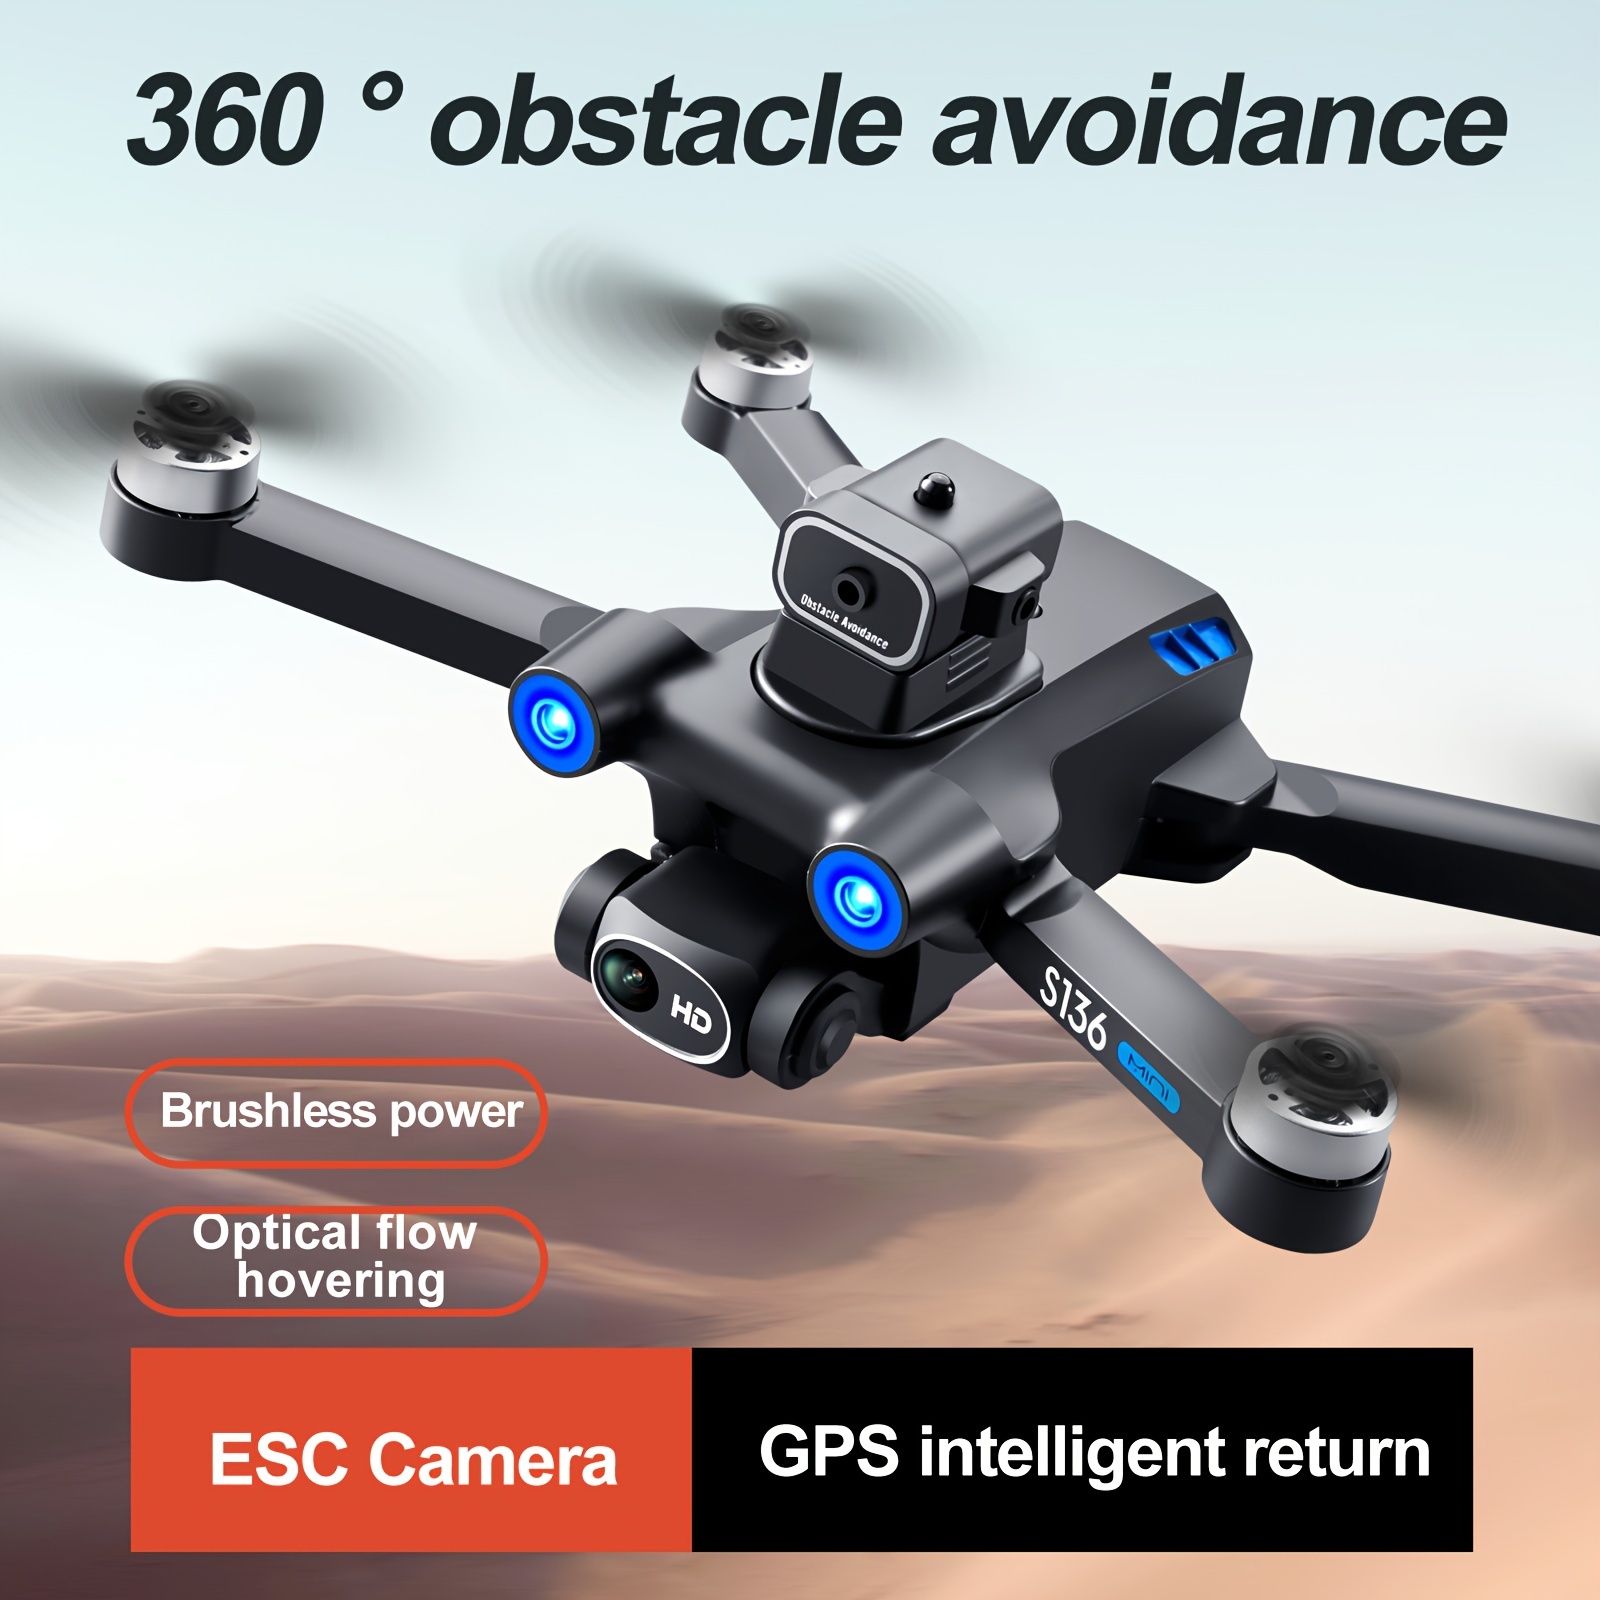 with 2 batteries new s136 quadcopter uav drone with hd esc dual camera gps positioning 360 intelligent obstacle avoidance optical flow hovering one key takeoff and fail safe return perfect for beginners mens gifts details 1